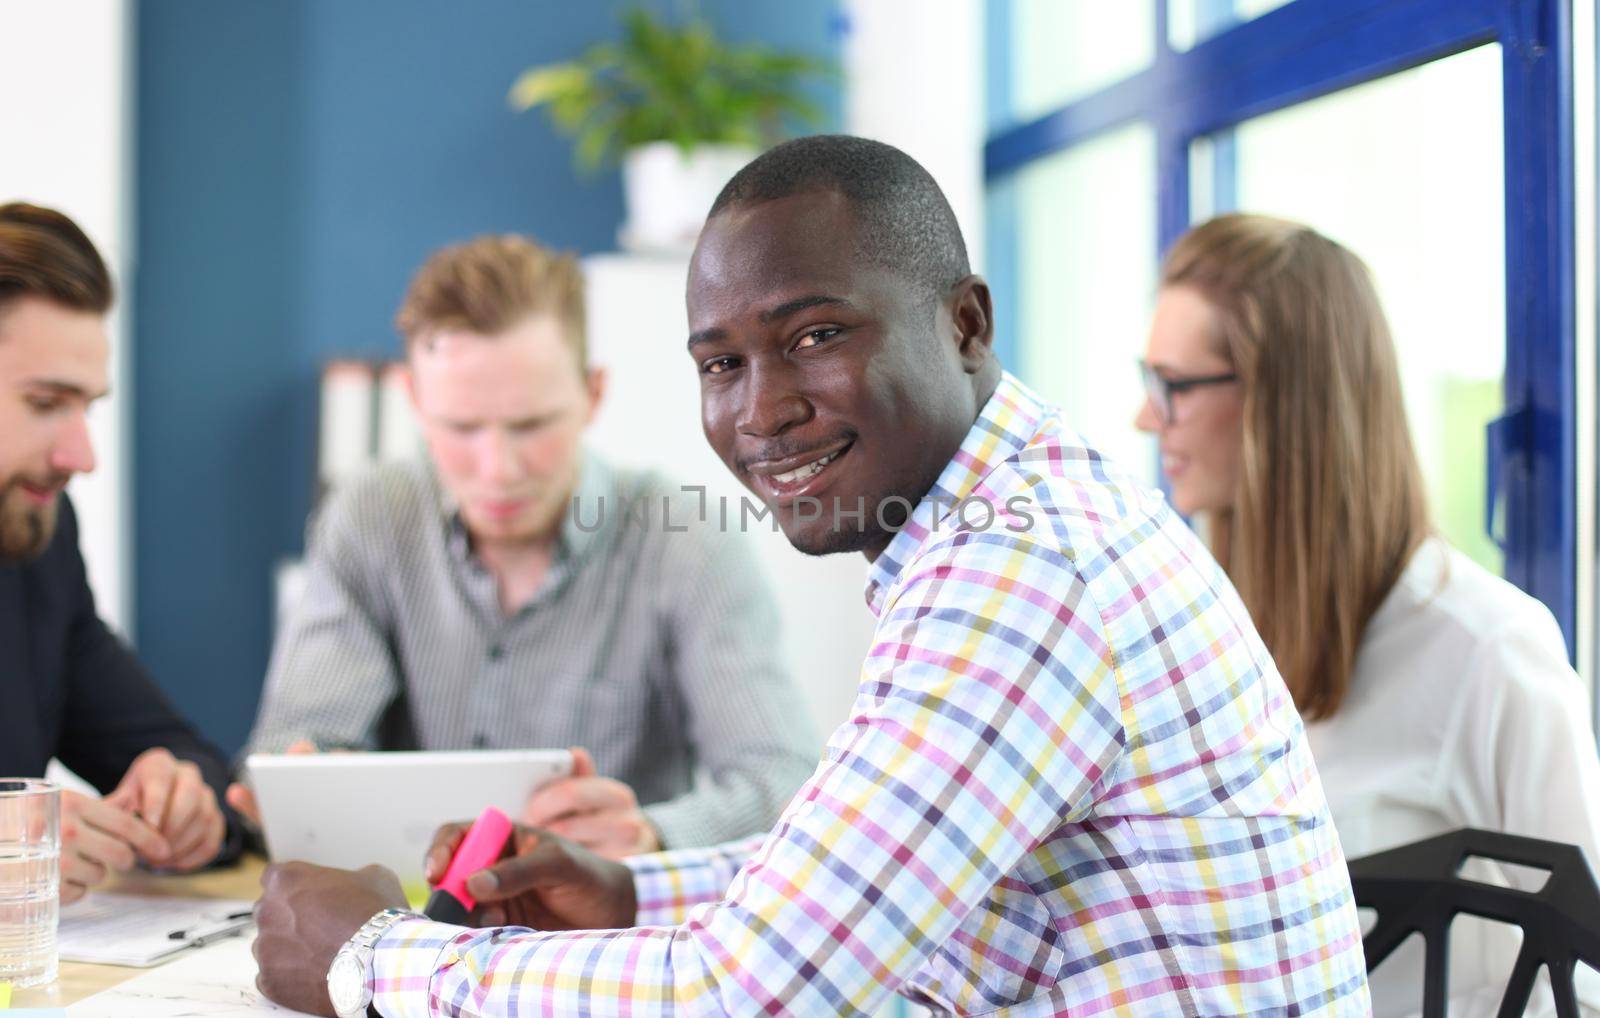 Portrait of smiling African American business man with executives working in background by tsyhun